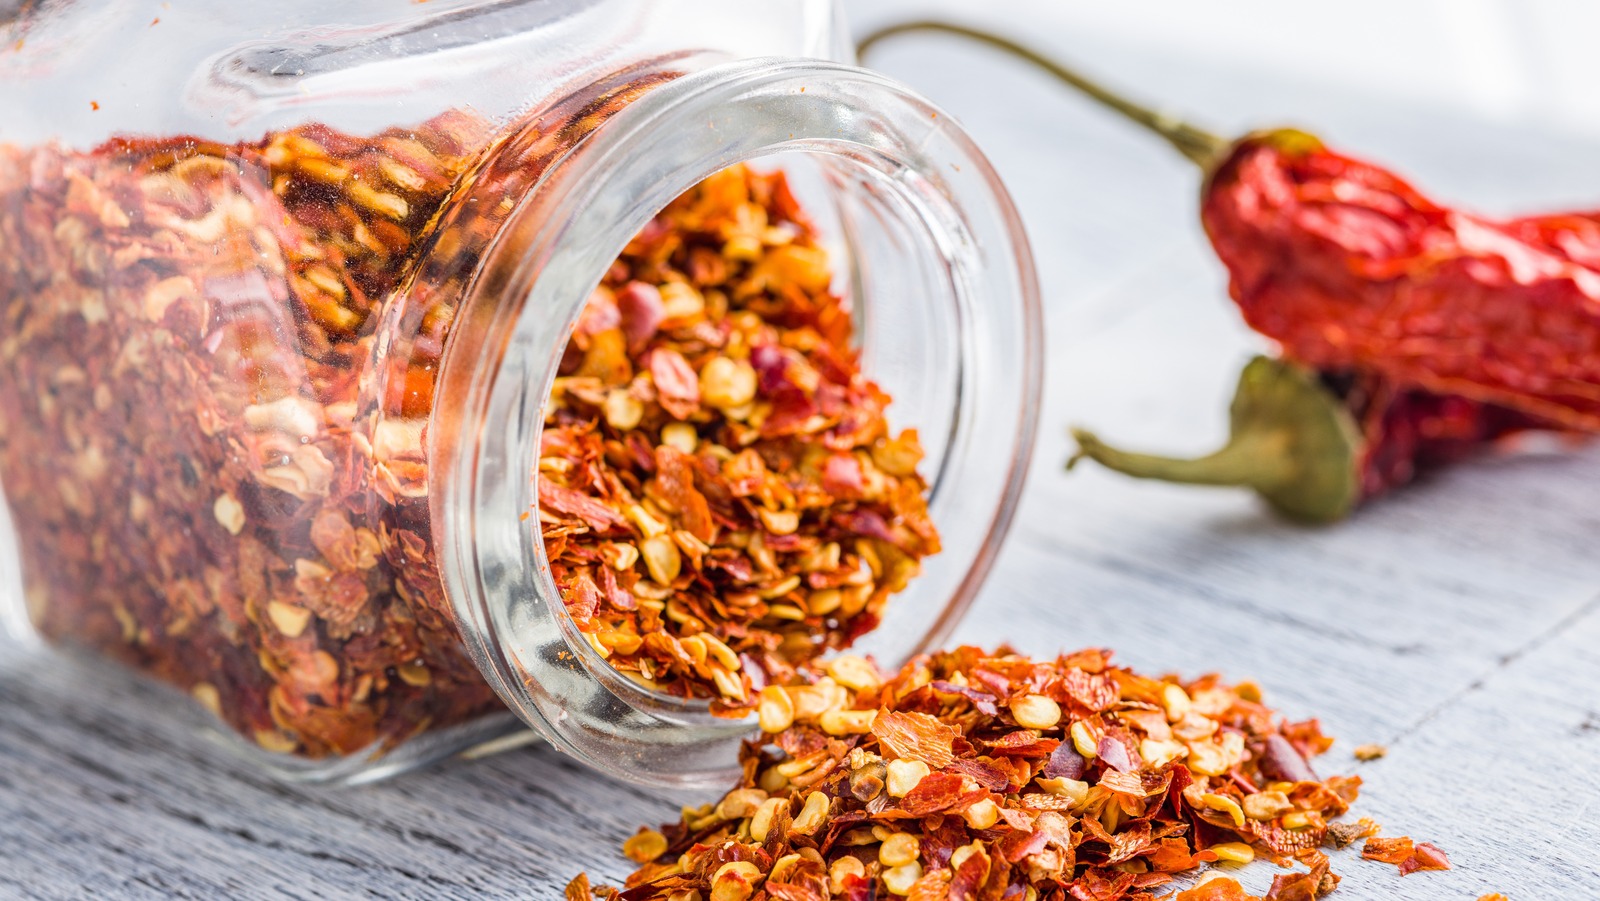 What's Actually Going On In Your Jar Of Red Pepper Flakes